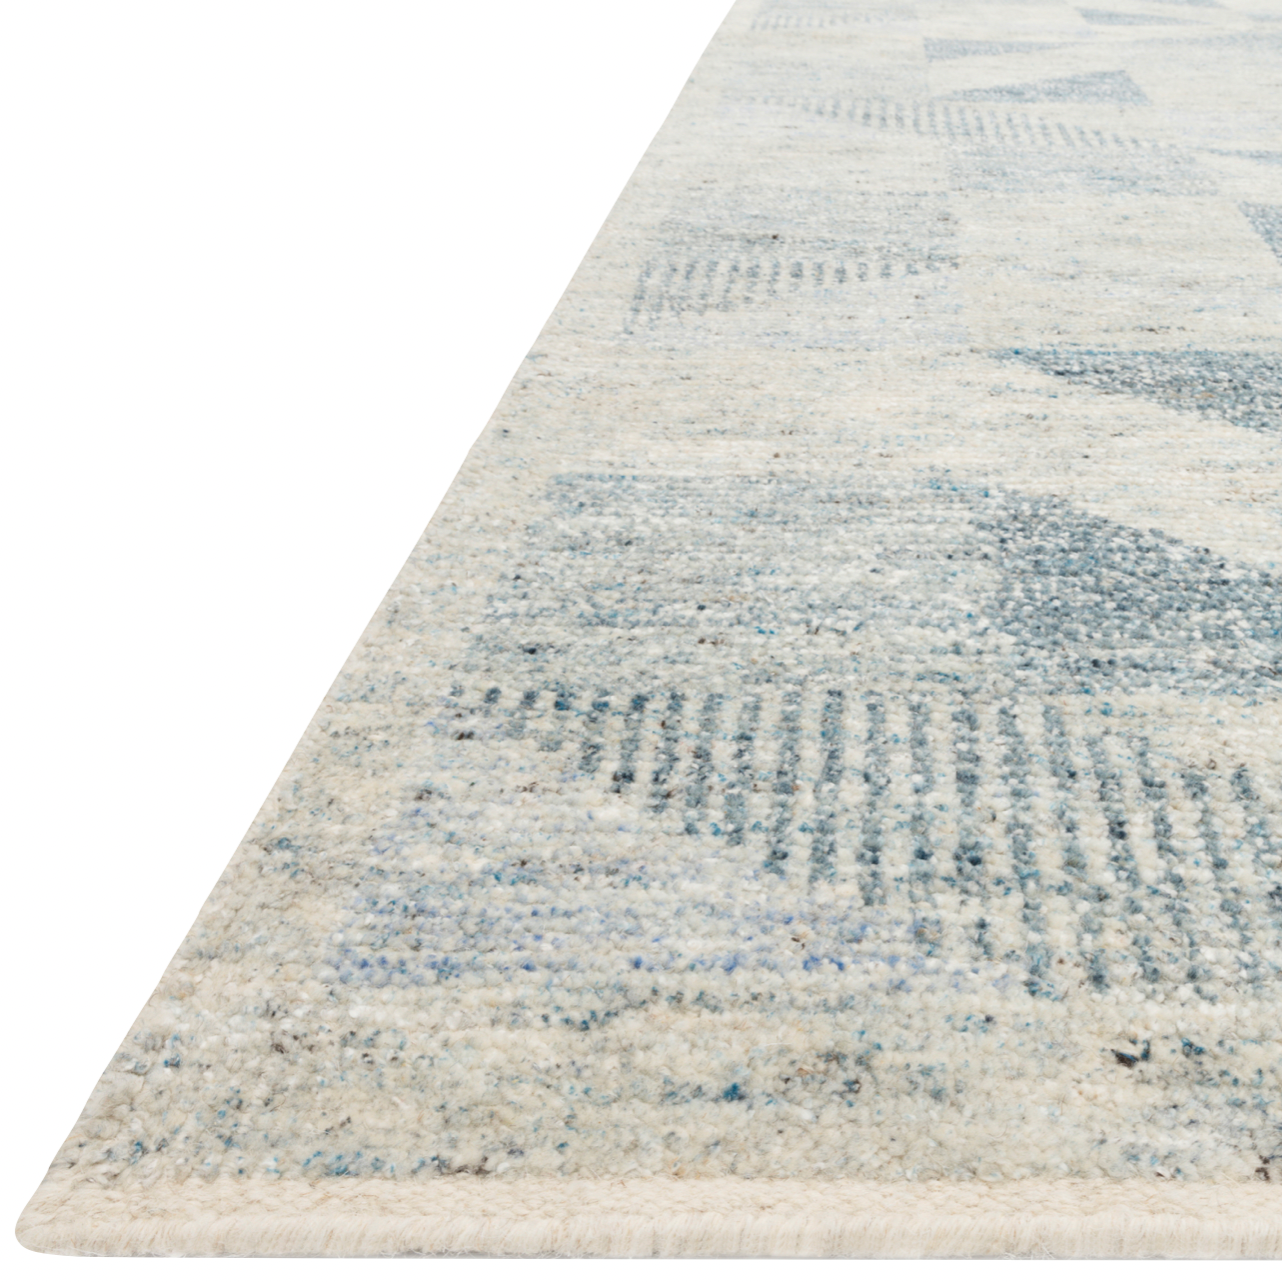 Drawing inspiration from tribal influences, the Odyssey Light BlueArea  Rug combines relaxed linear pattern with a sophisticated color palette. Each Odyssey area rug, which is hand knotted of wool, viscose, and cotton, is crafted entirely by hand by master artisans in India.  Hand Knotted 70% Viscose from Bamboo | 30% Wool OD-06 Light Blue